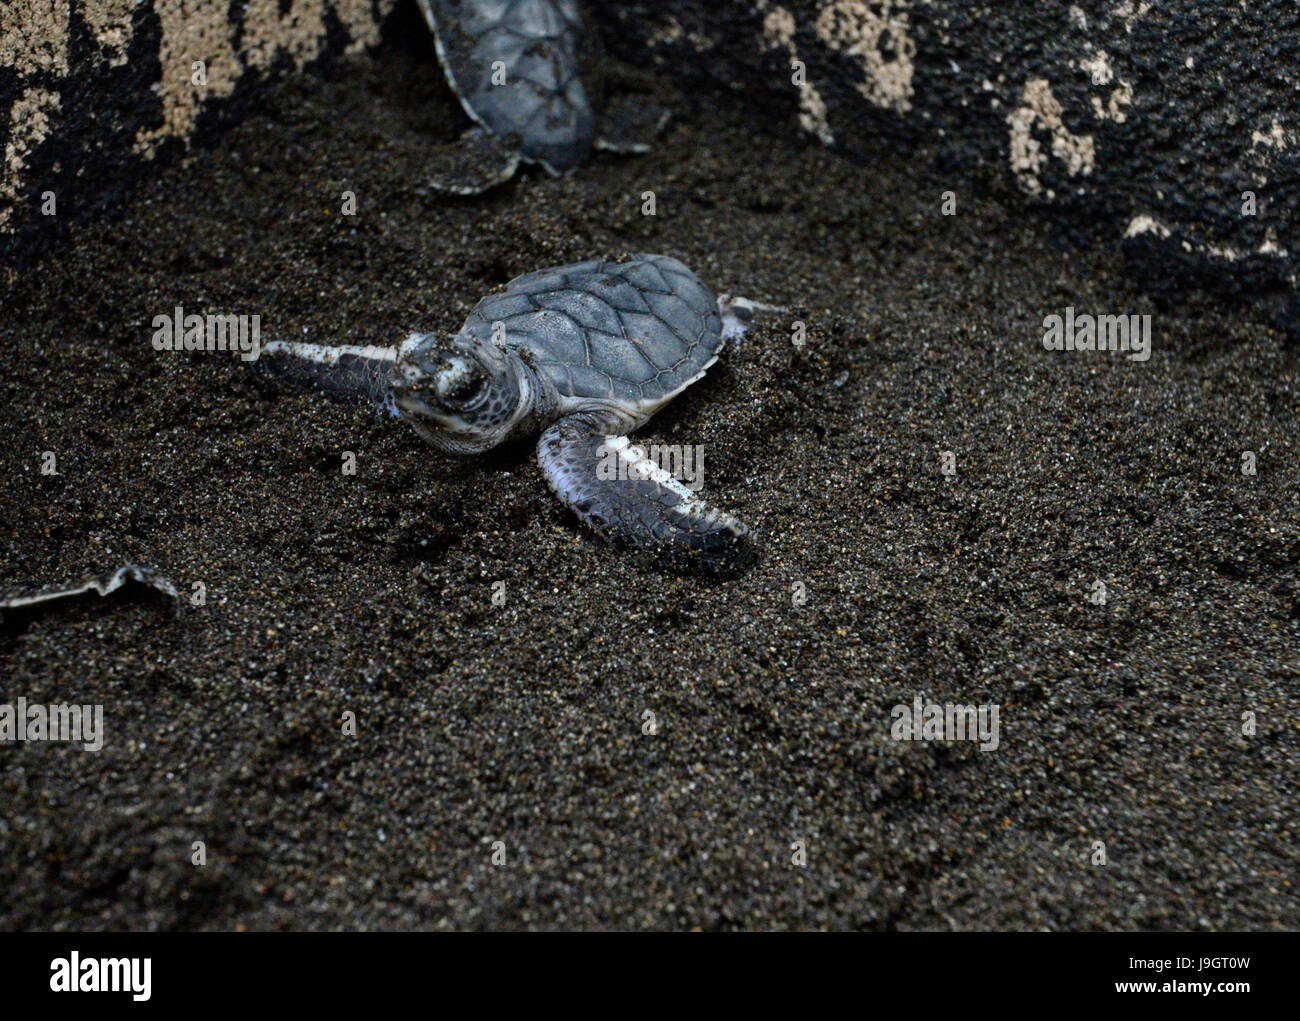 A recently hatched green sea turtle (Chelonia mydas) crawls in a styrofoam box before being released into the ocean as part of Latin America Sea Turtl Stock Photo